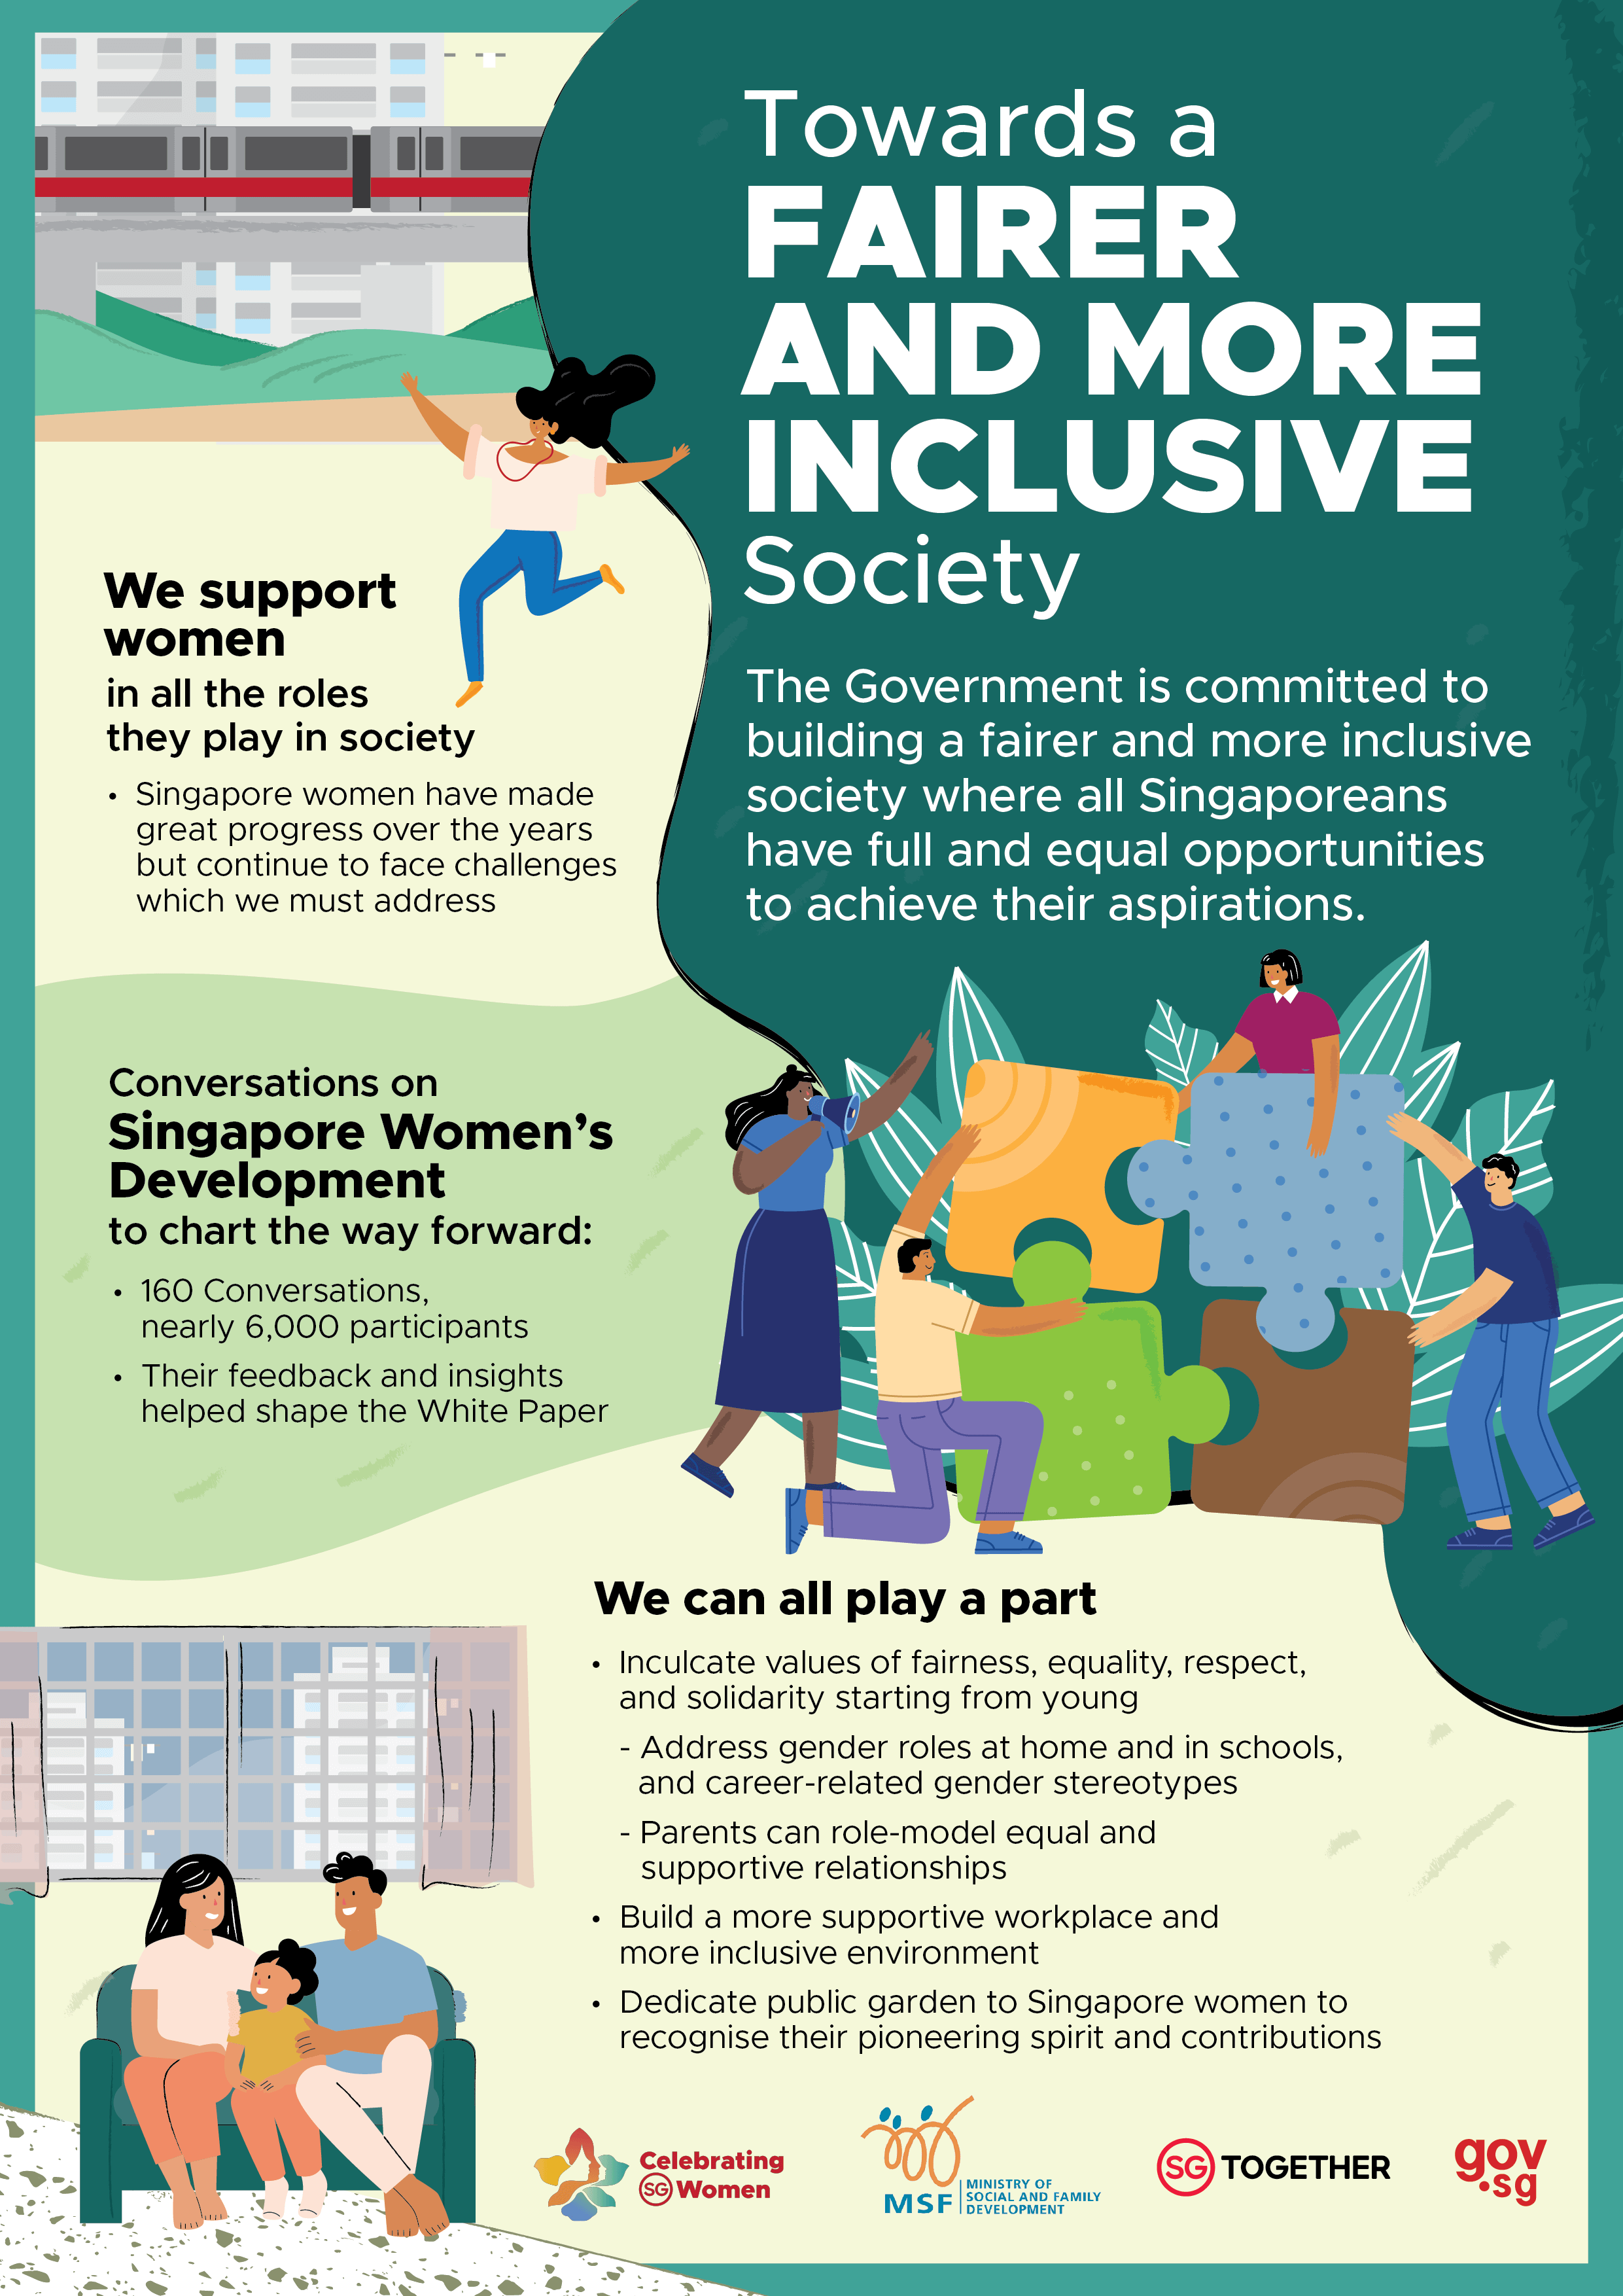 CSGW Infographic 1 - Towards a Fairer and More Inclusive Society